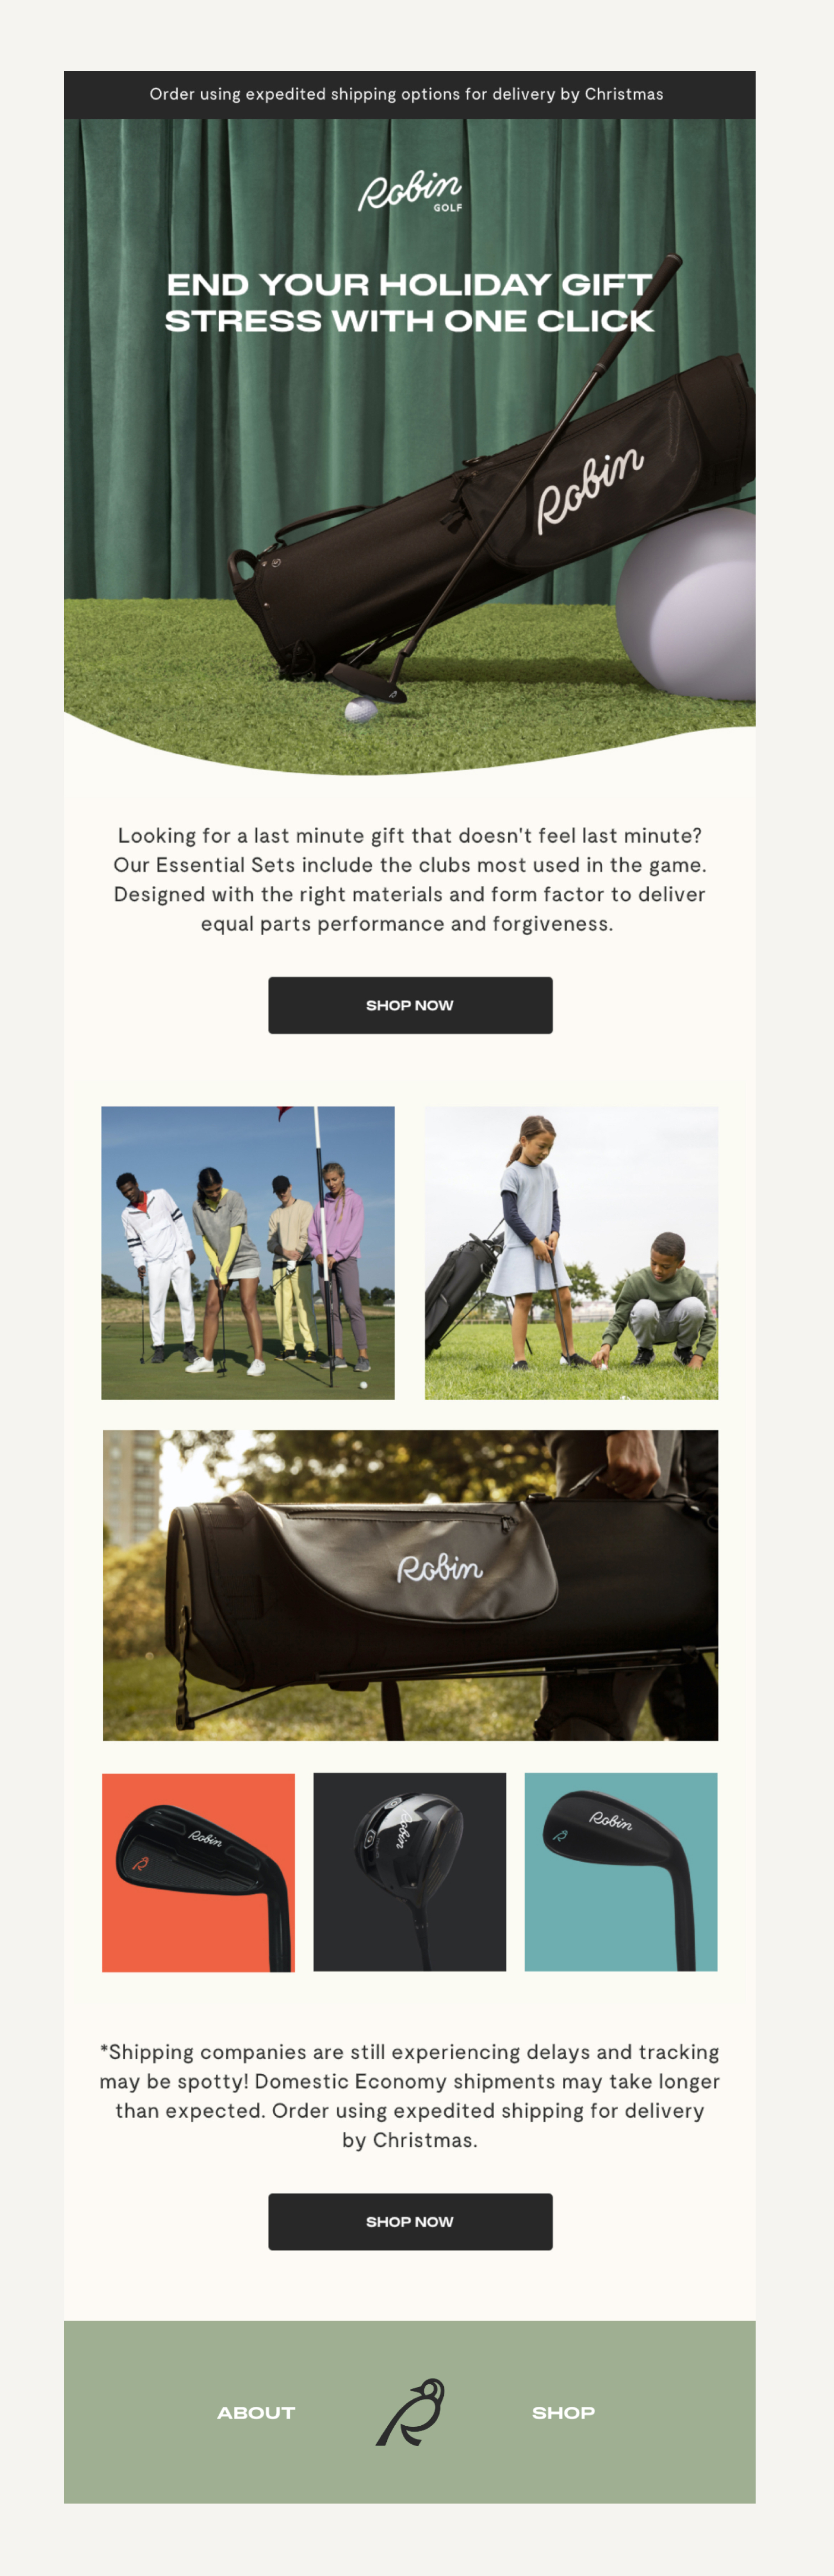 robin golf brand golf club holder and people both adults and children using the golf clubs